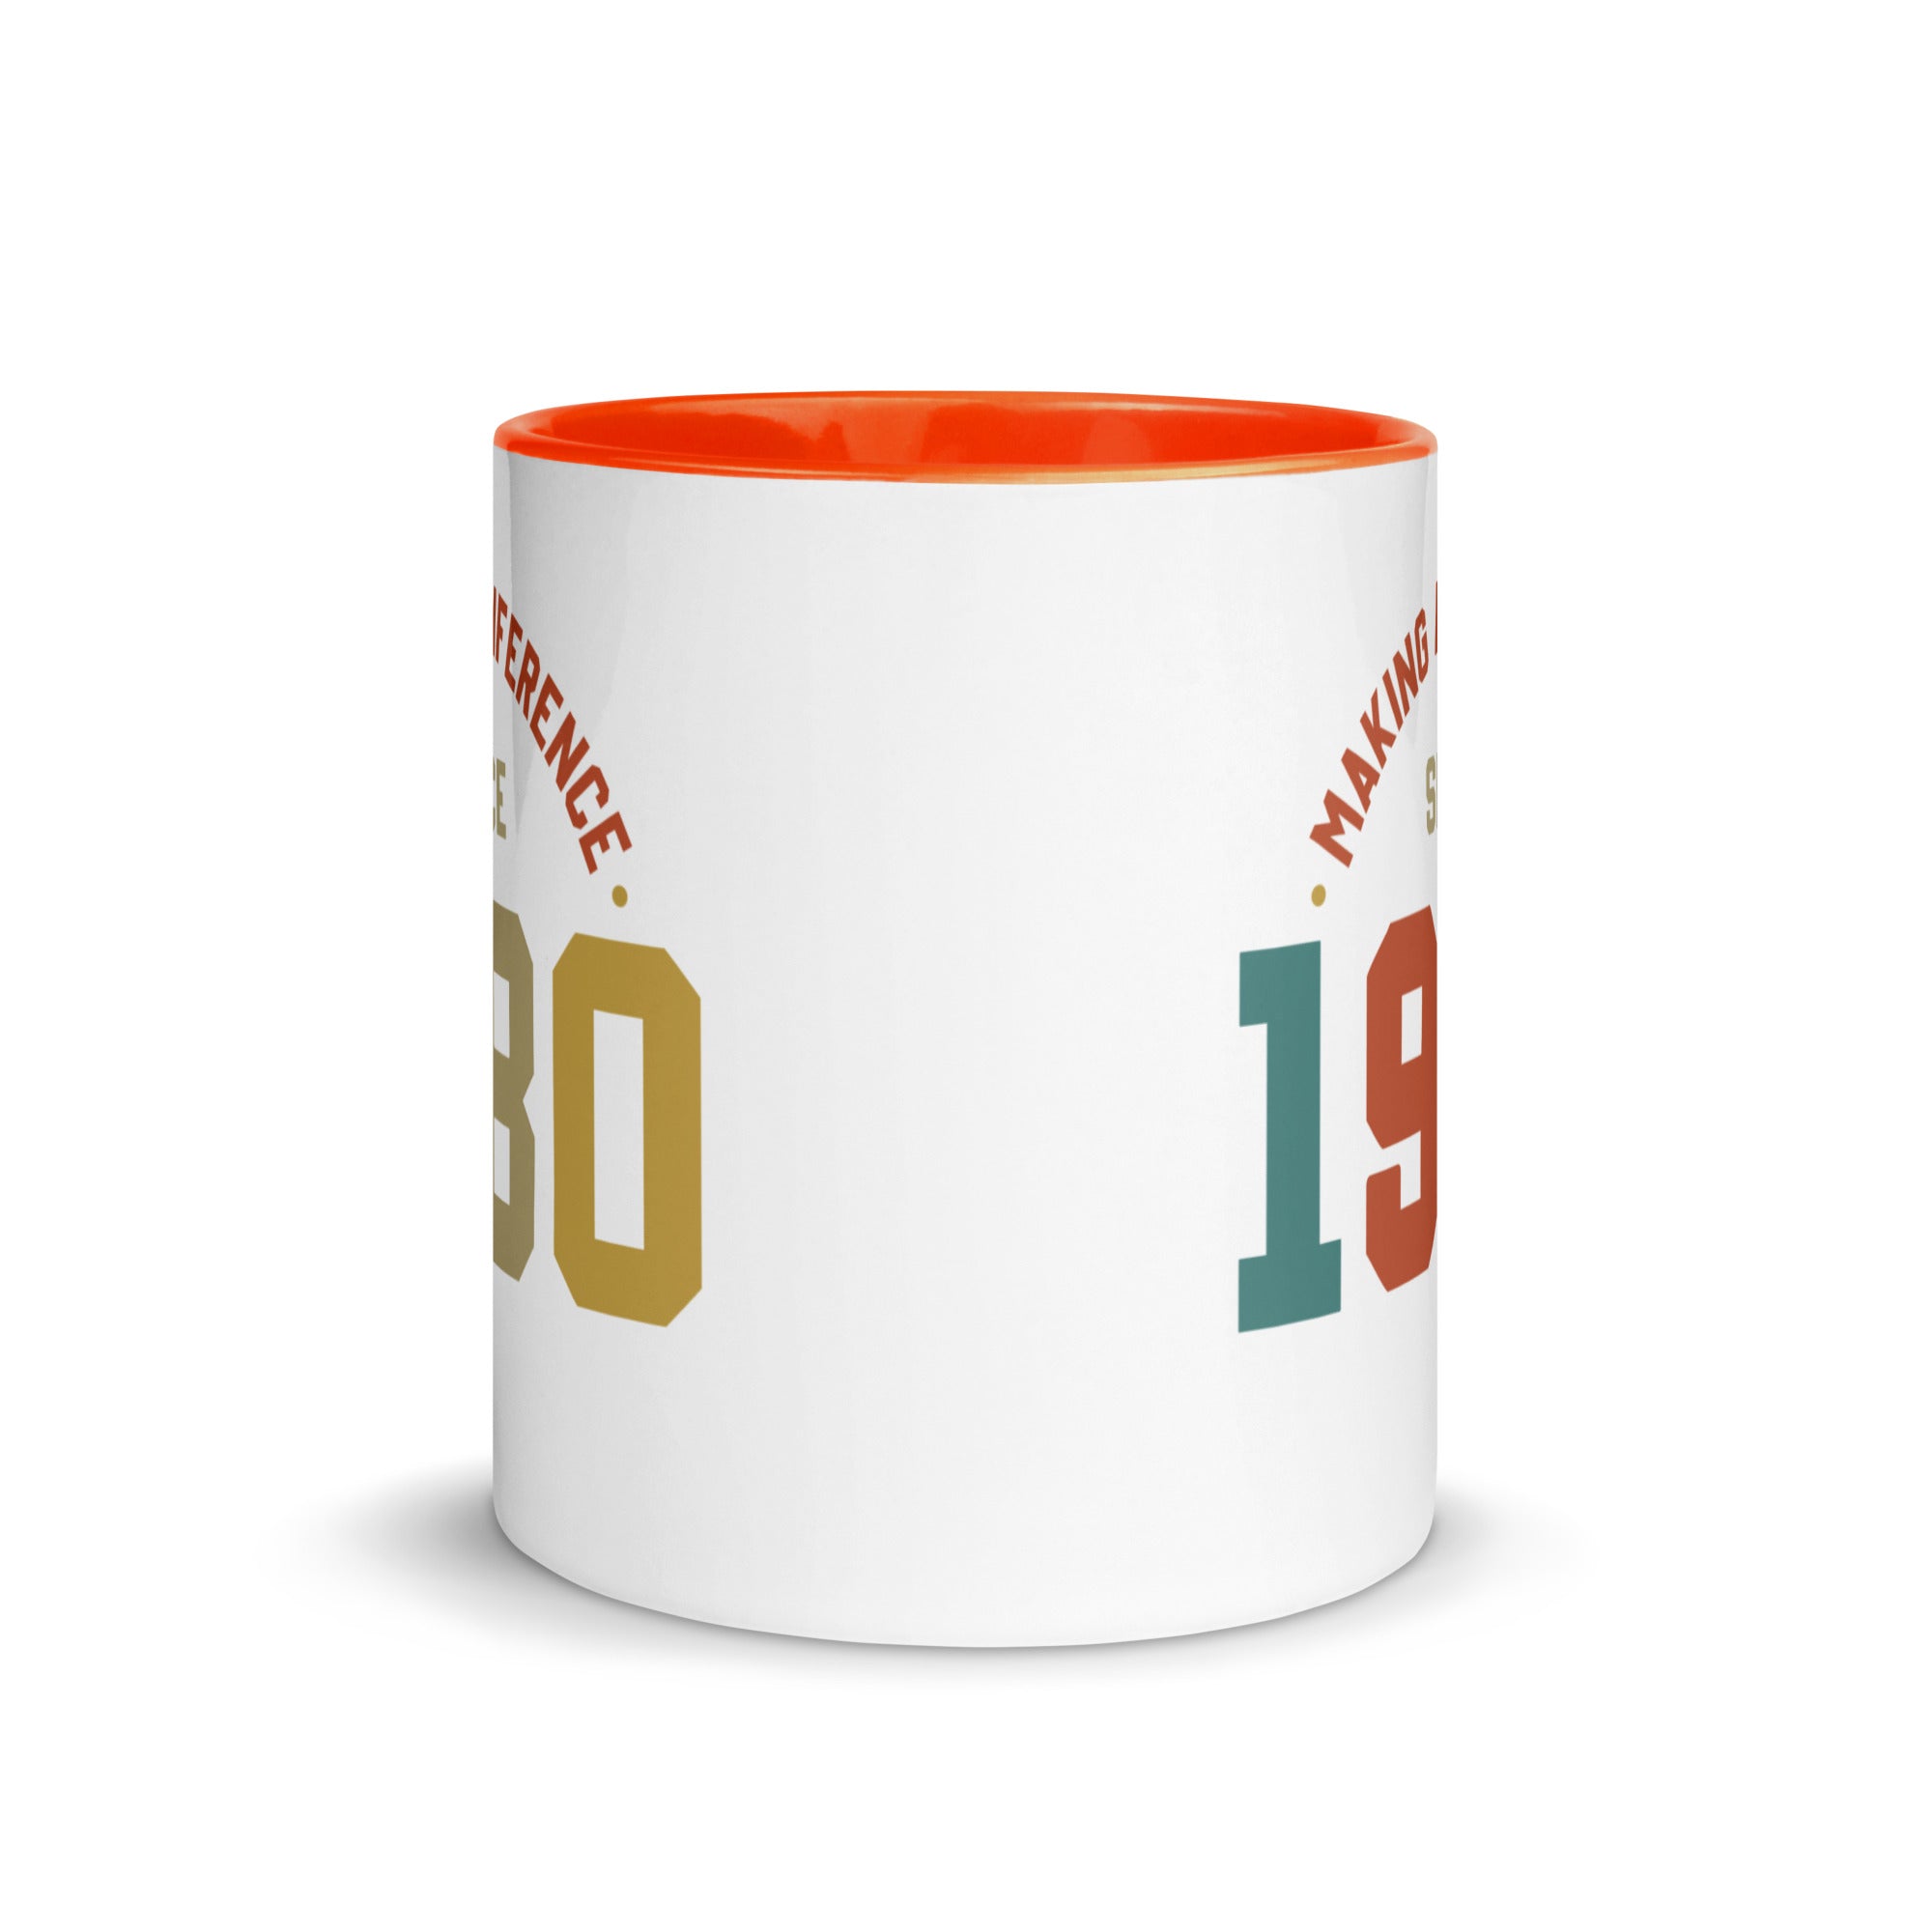 Mug with Color Inside | Making a diference since 1980